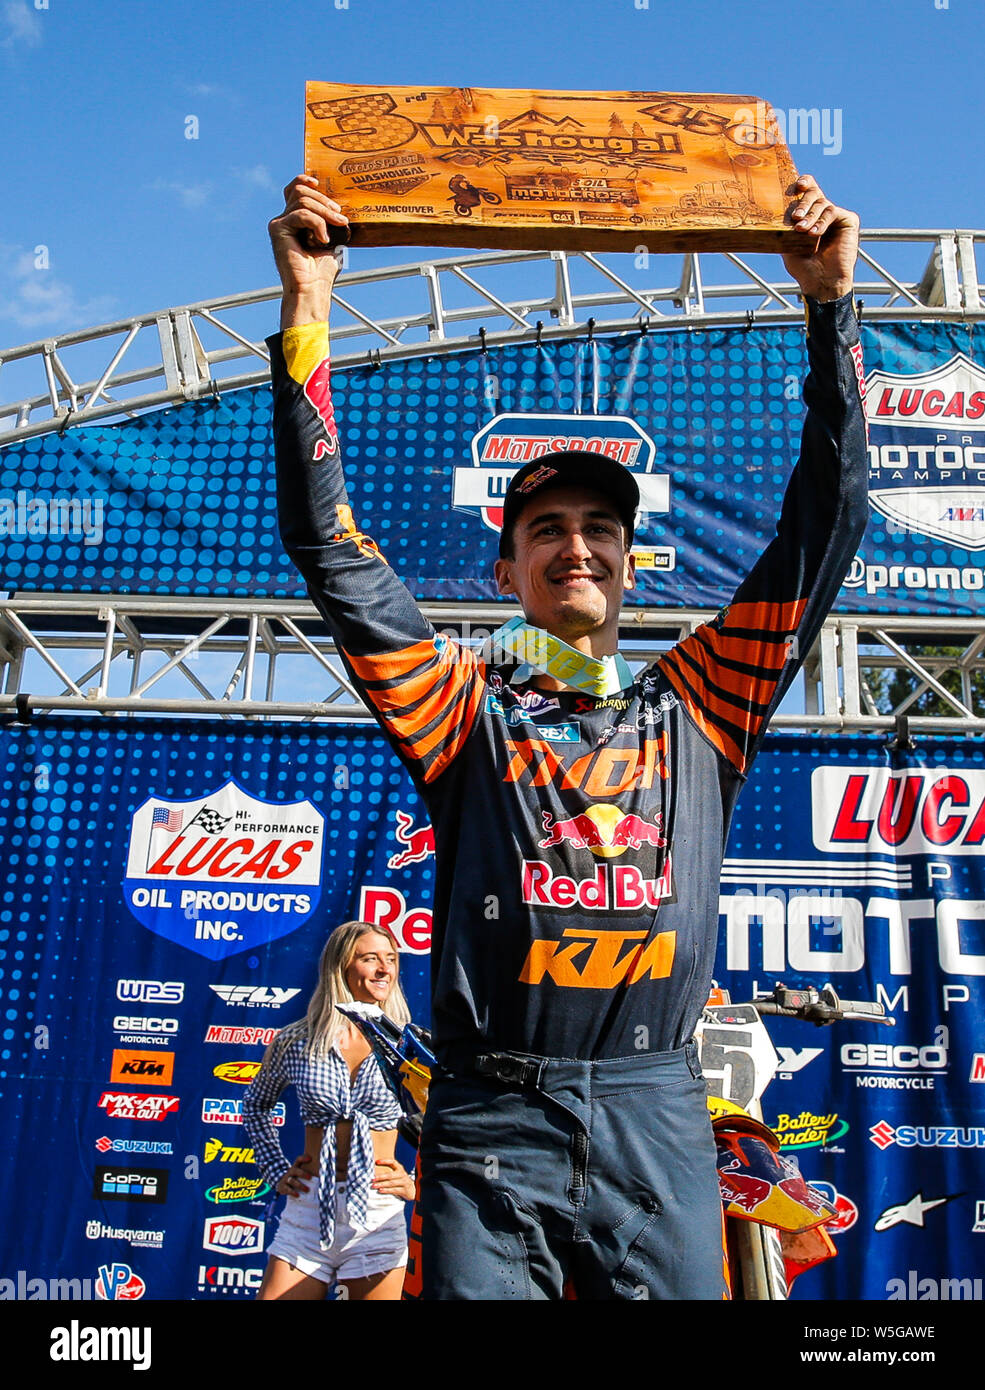 Washougal, WA USA. 27th July, 2019. # 25 Marvin Musqin hold up his 3rd place plaque after the Lucas Oil Pro Motocross Washougal National 450 class championship at Washougal MX park Washougal, WA Thurman James/CSM/Alamy Live News Stock Photo